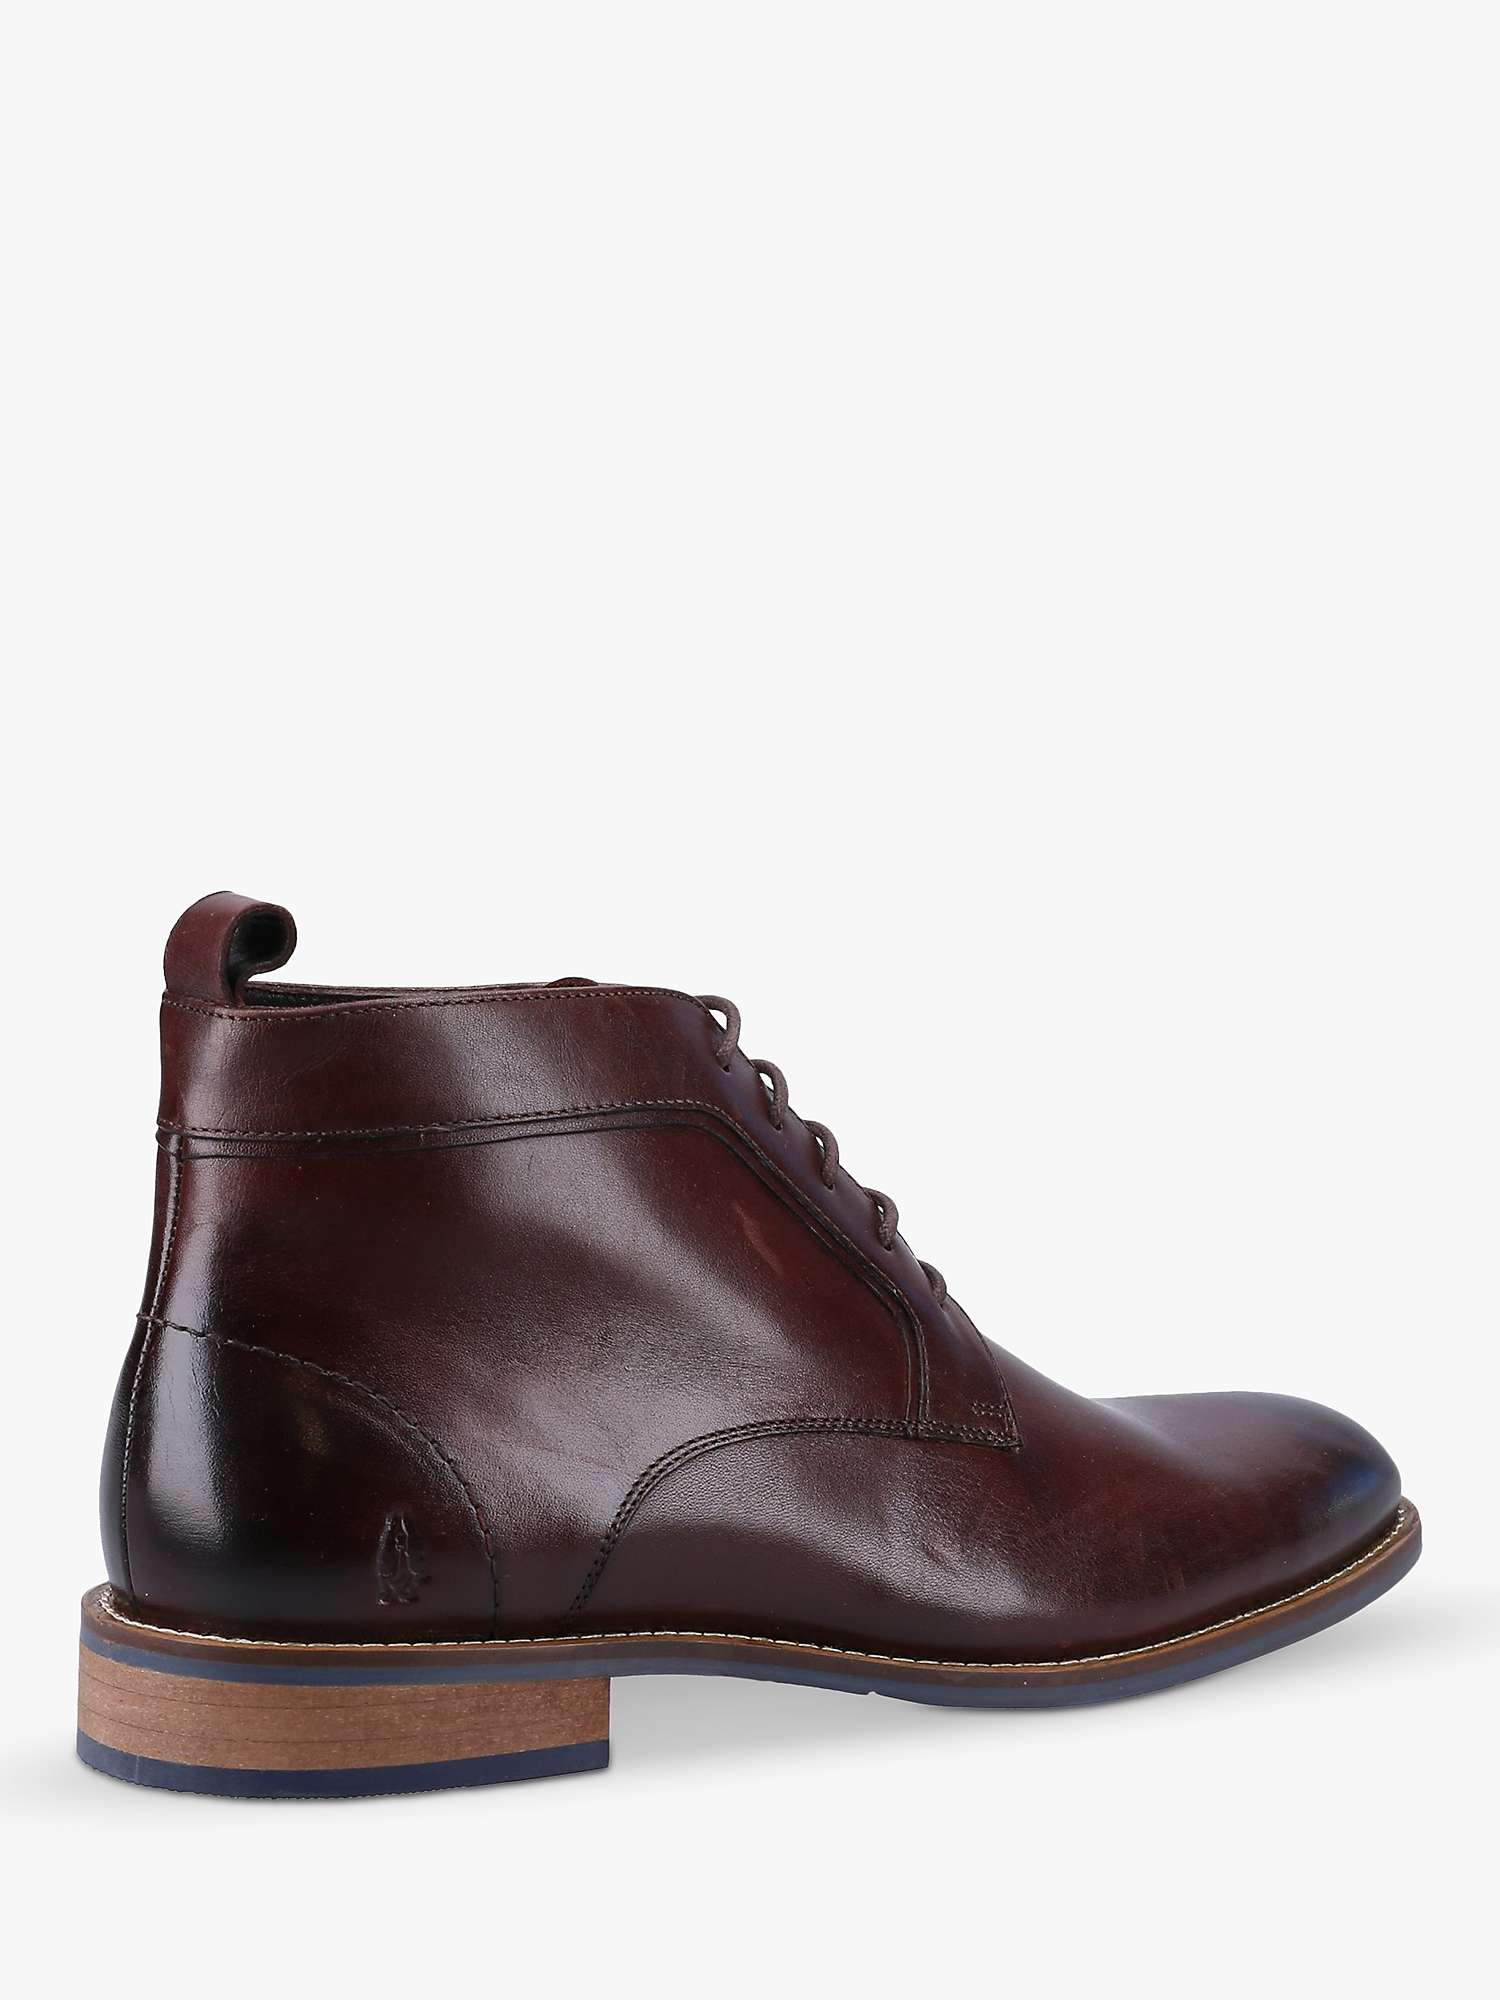 Hush Puppies Declan Leather Lace Up Ankle Boots, Brown at John Lewis ...